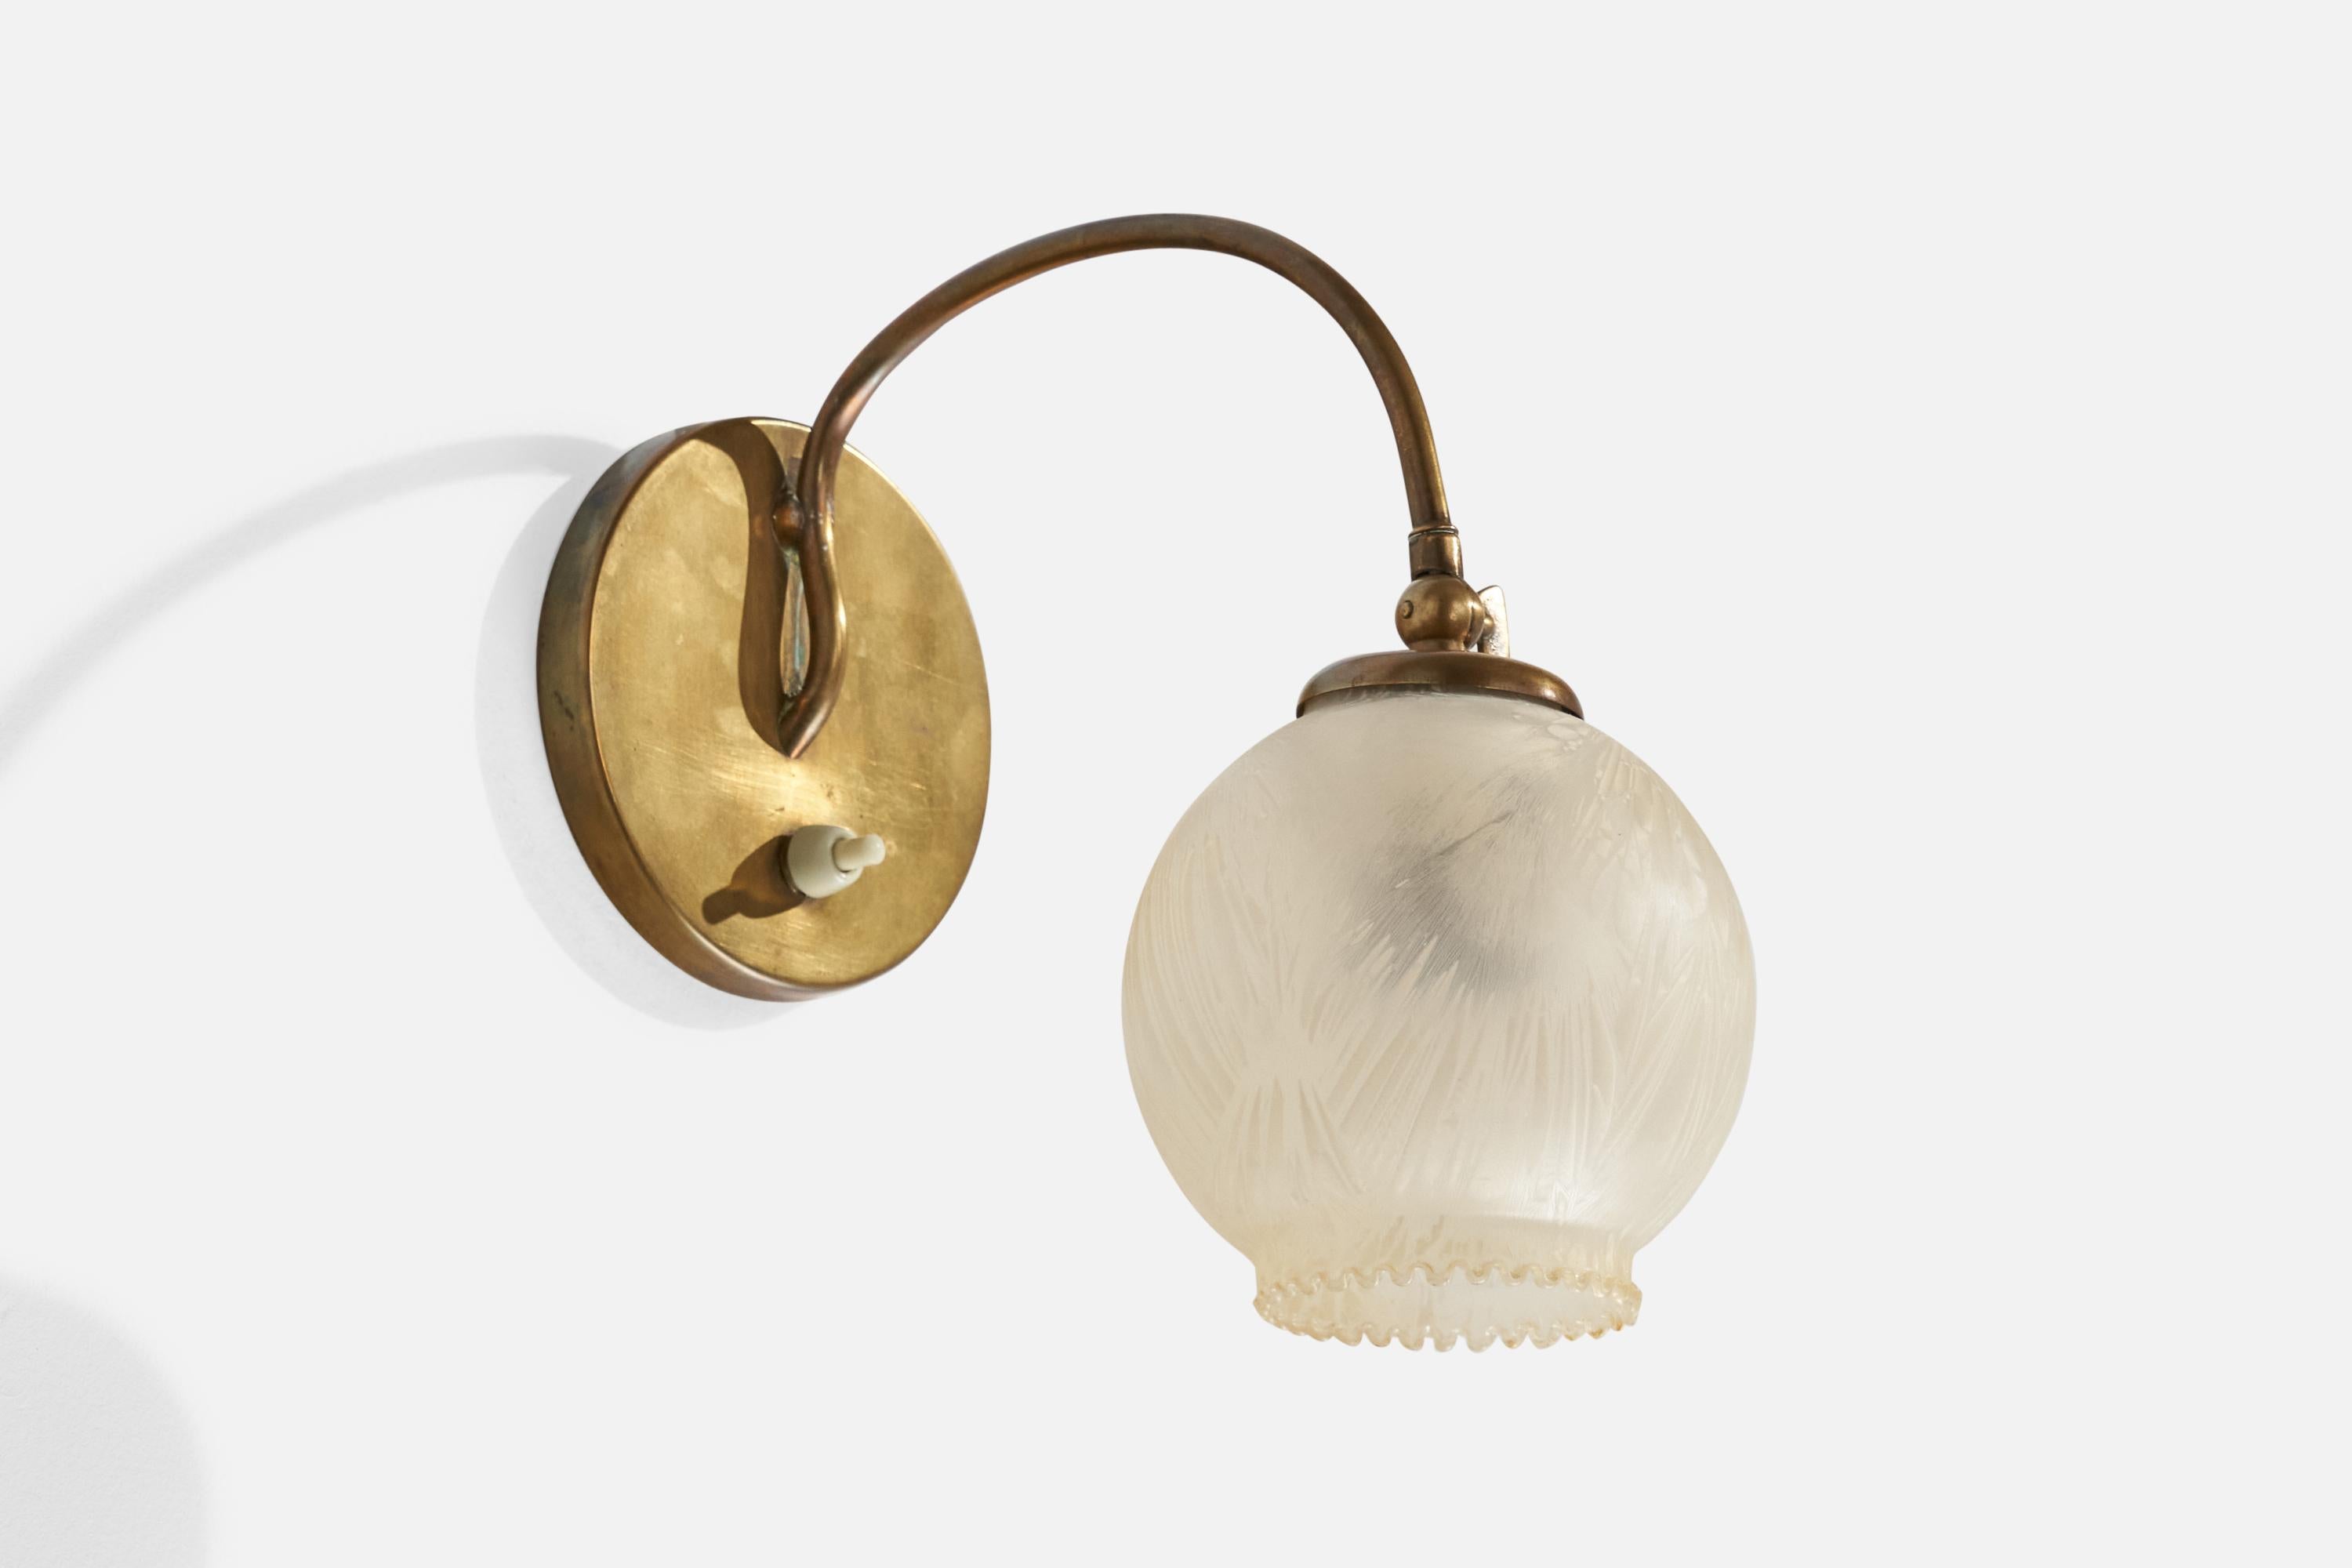 An adjustable brass and etched glass wall light or table lamp produced by E&S, Sweden, c. 1940s.

Please note that lamp functions via plug in, with cord feeding from upper edge of backplate as currently configured.

Dimensions variable 
Overall